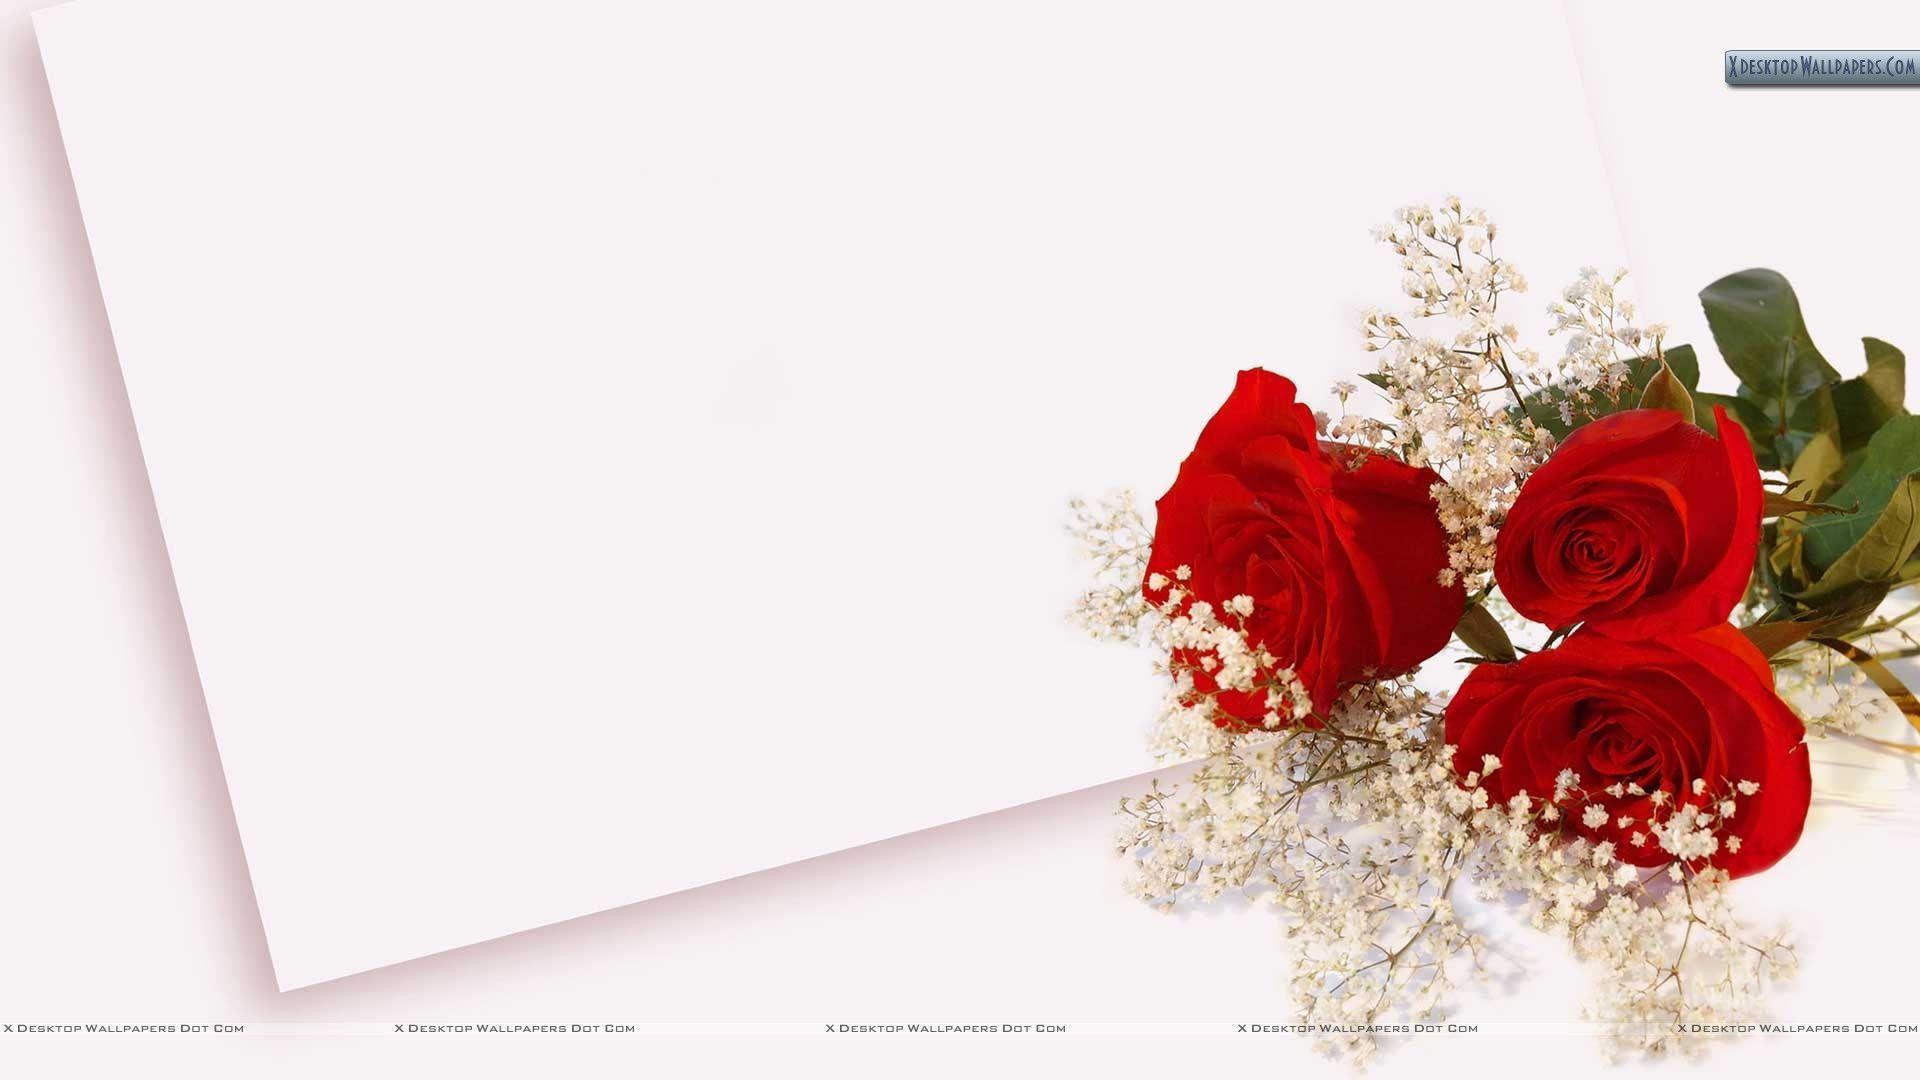 Wedding Flowers With Envelope Wallpaper 1920x1080 px Free Download